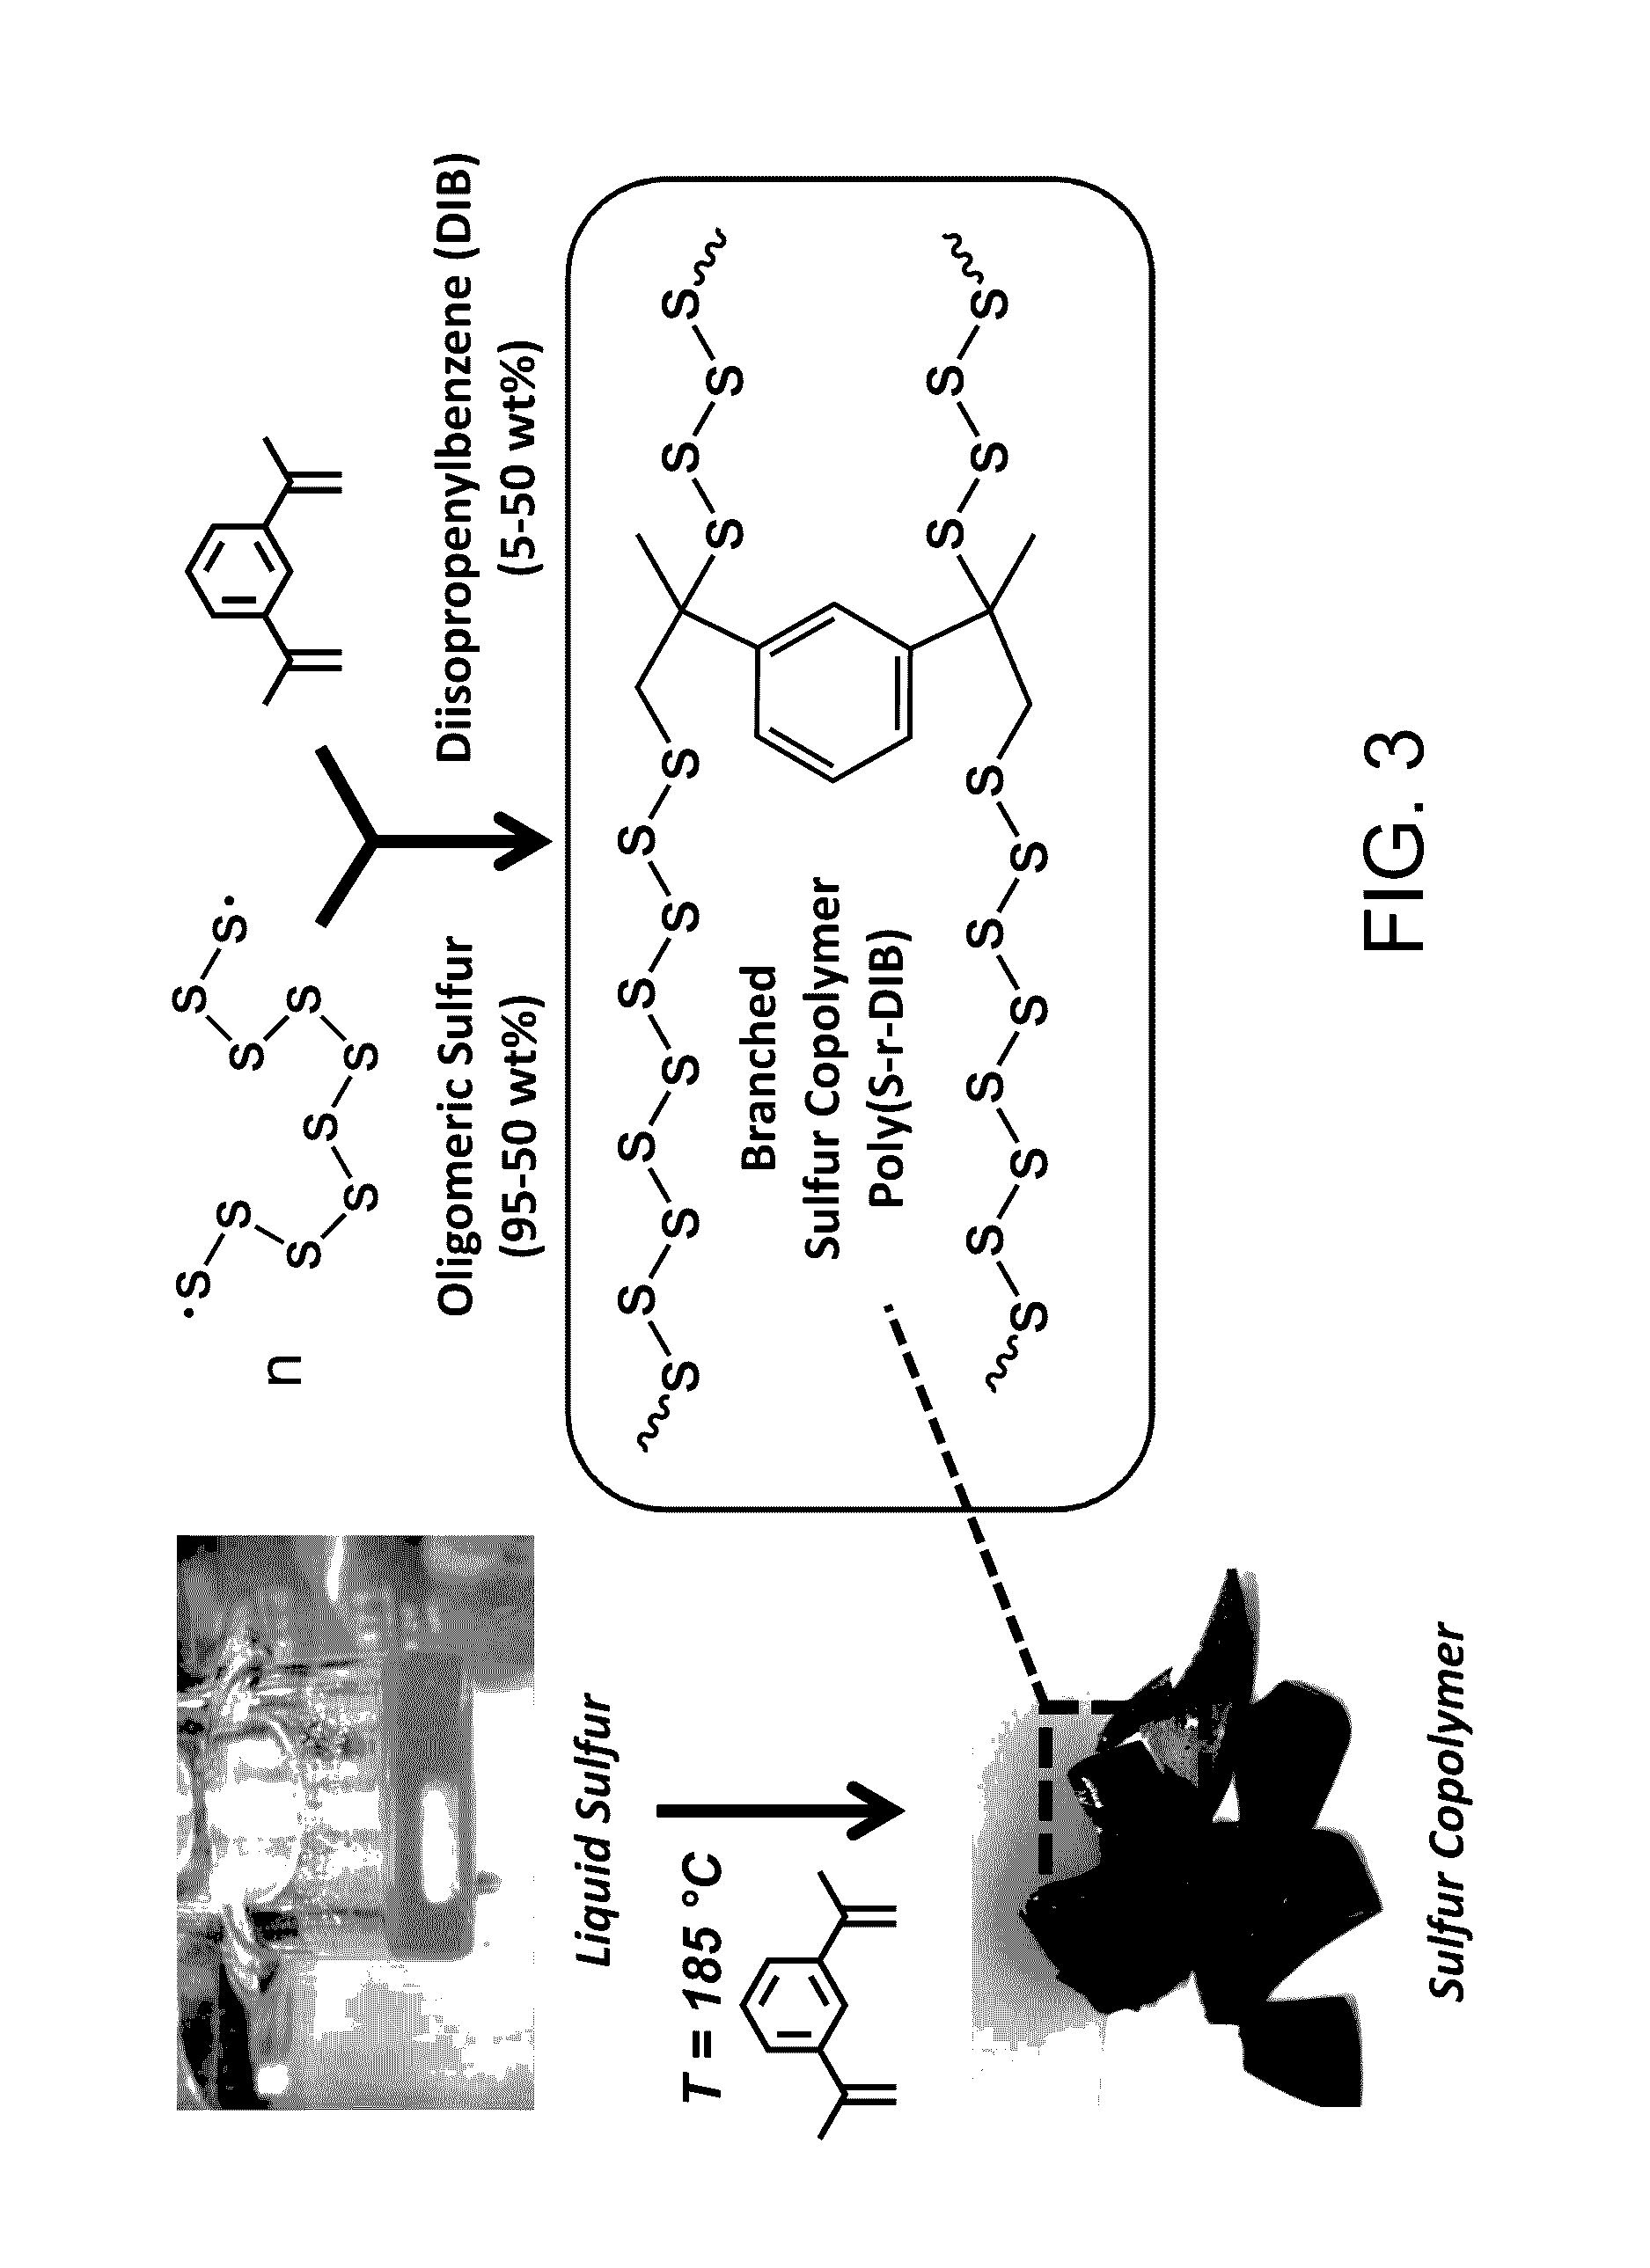 Sulfur composites and polymeric materials from elemental sulfur